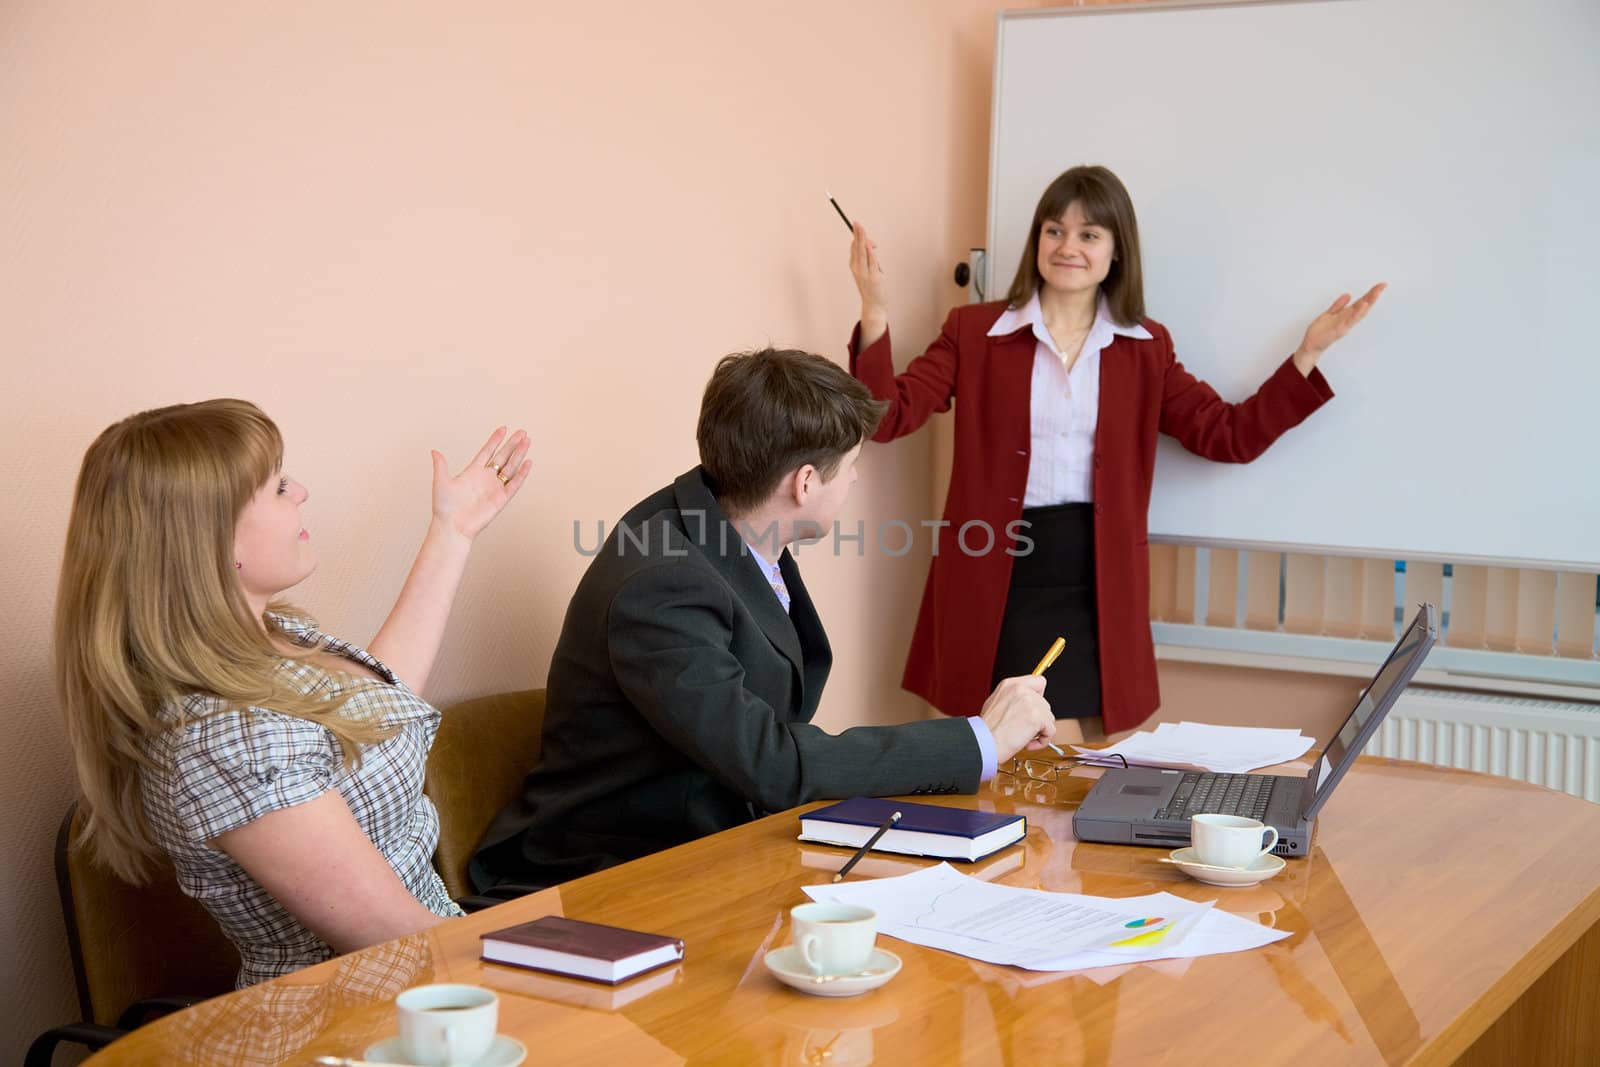 The young woman to speak at a meeting